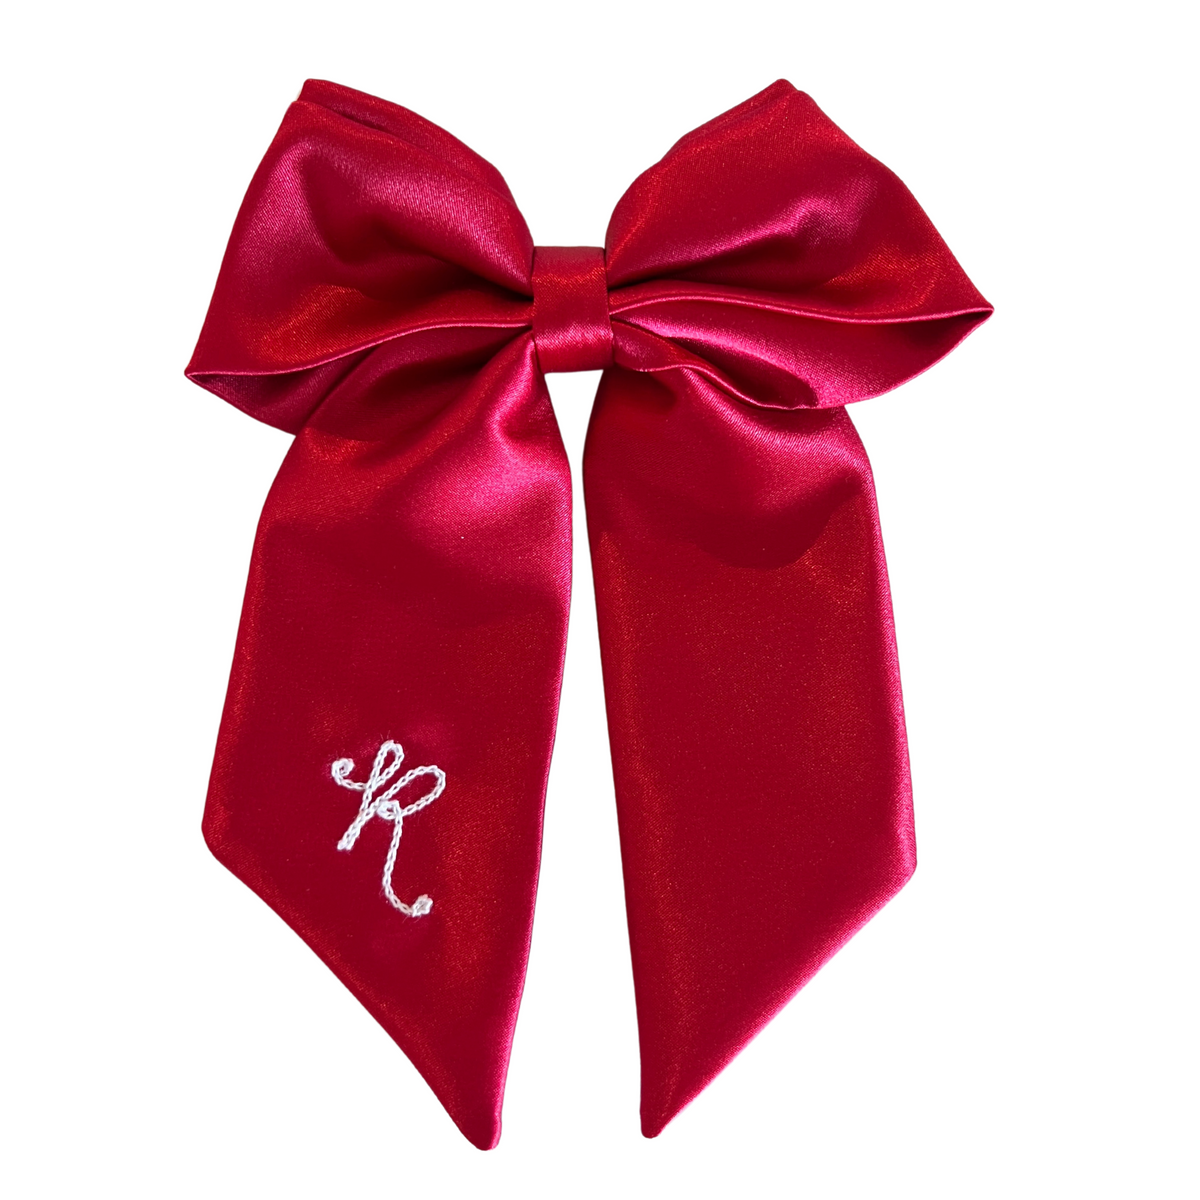 Initial Chainstitch Bow